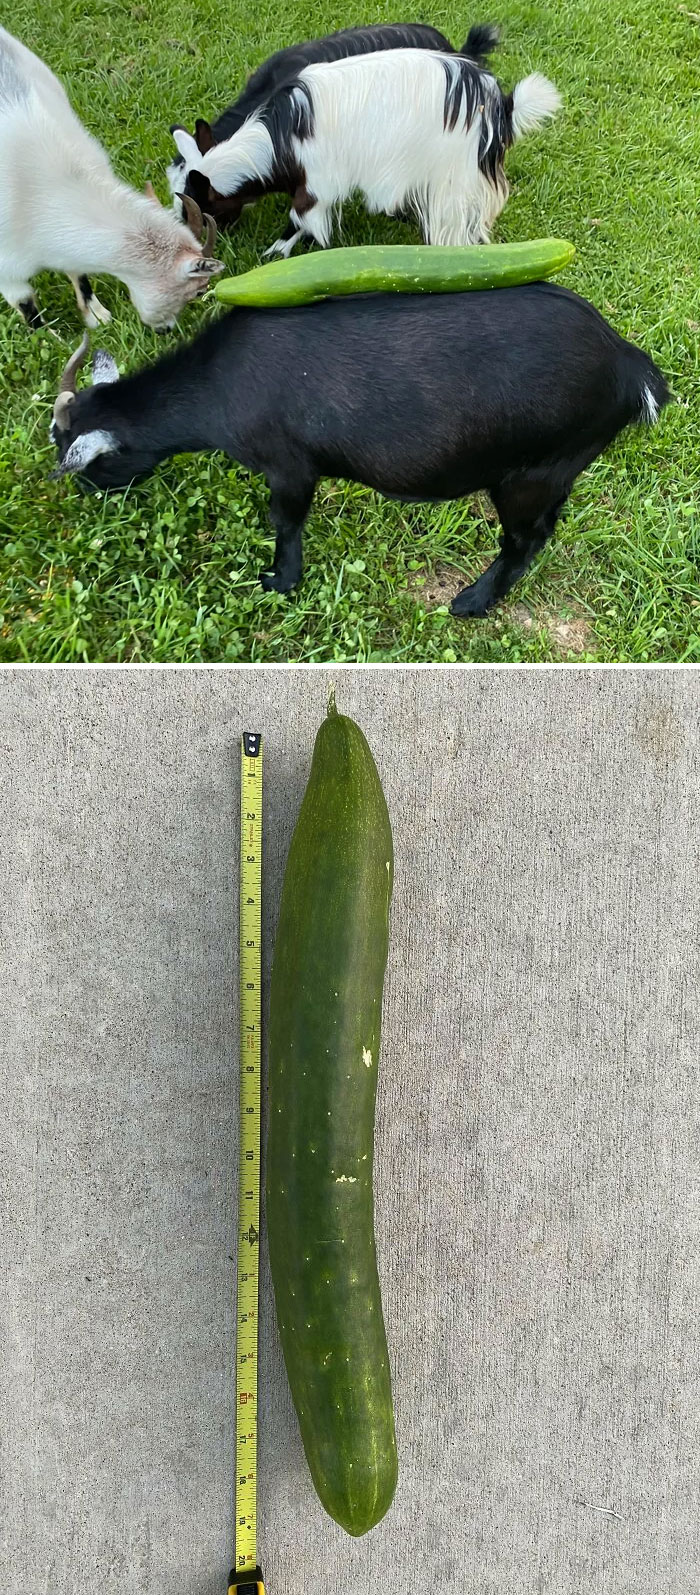 I Grew A 19.5-Inch Cucumber (Goat For Scale)